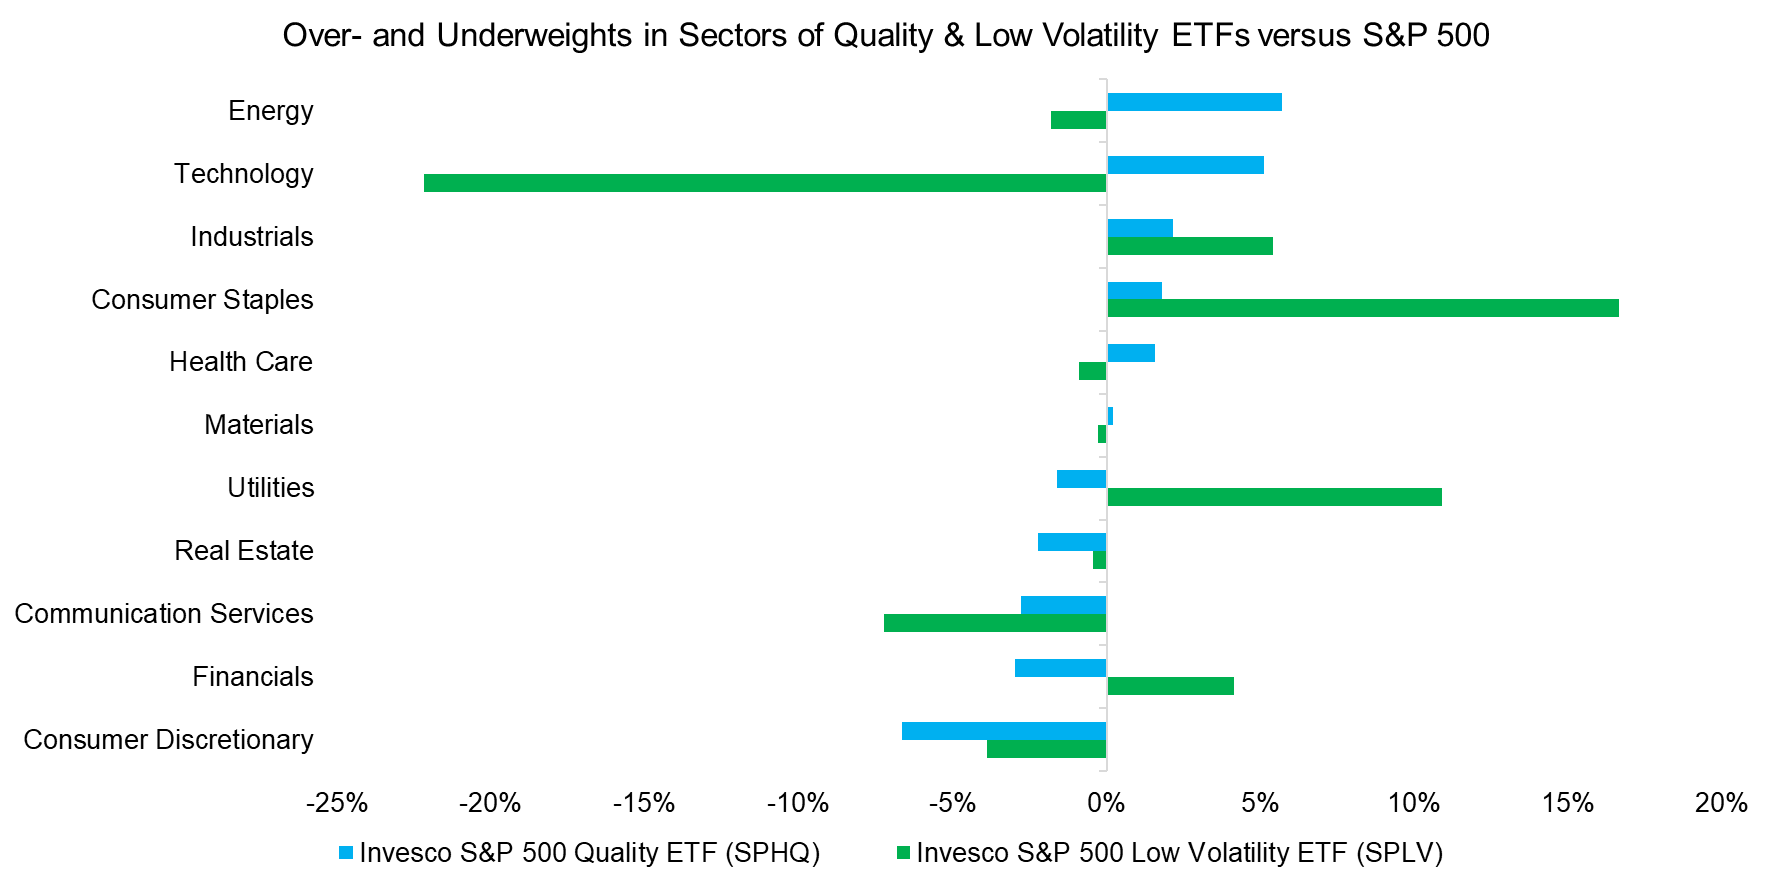 Over- and Underweights in Sectors of Quality & Low Volatility ETFs versus S&P 500